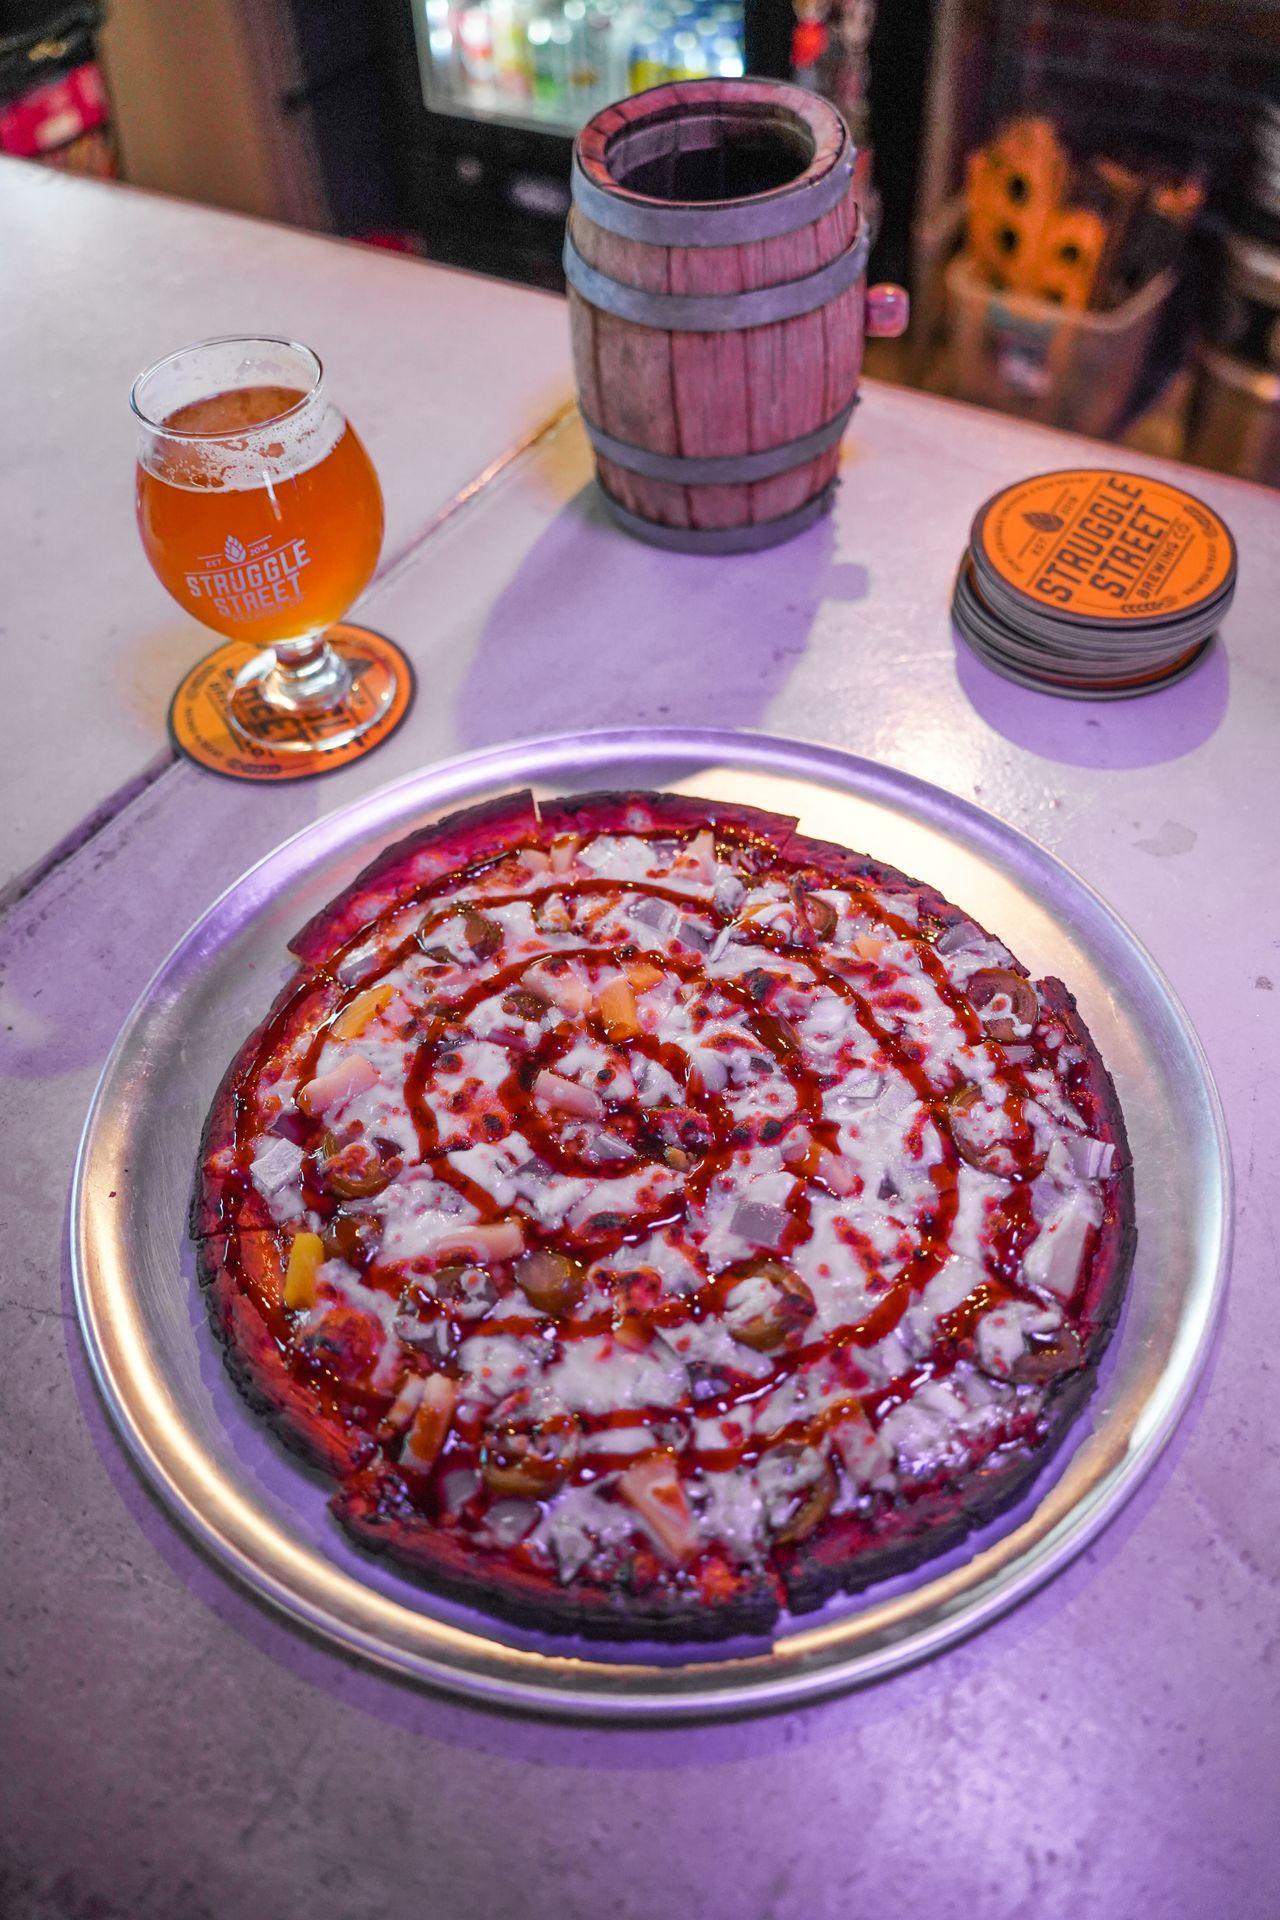 A pizza topped with red hot sauce spiraling around the pizza.